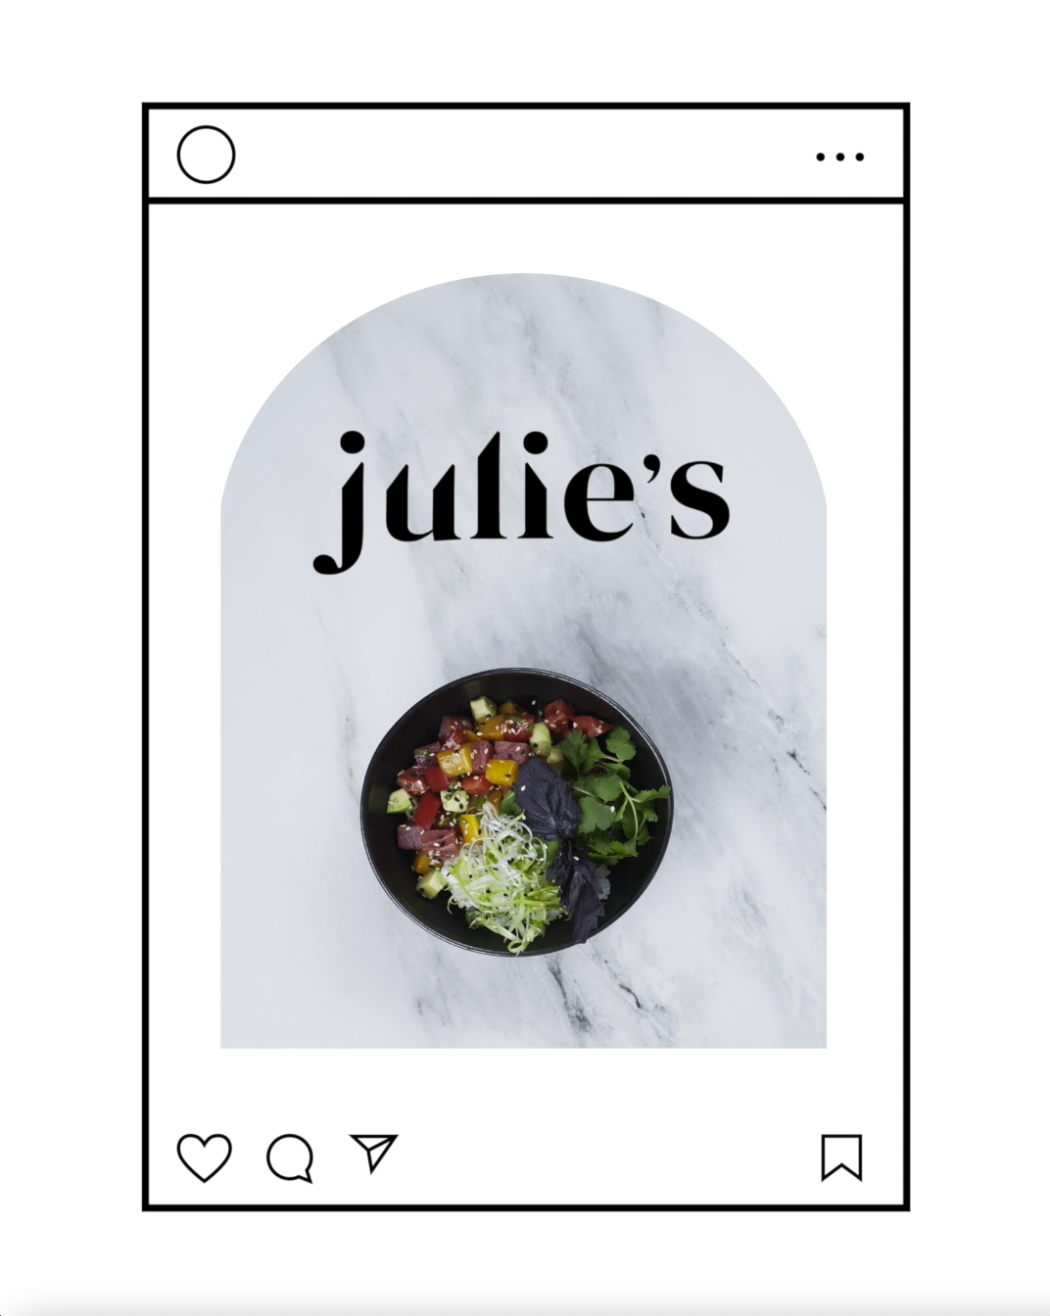 Thumbnail image shows a mockup of social assets for julie's restaurant , with plated food on a white marble background shape